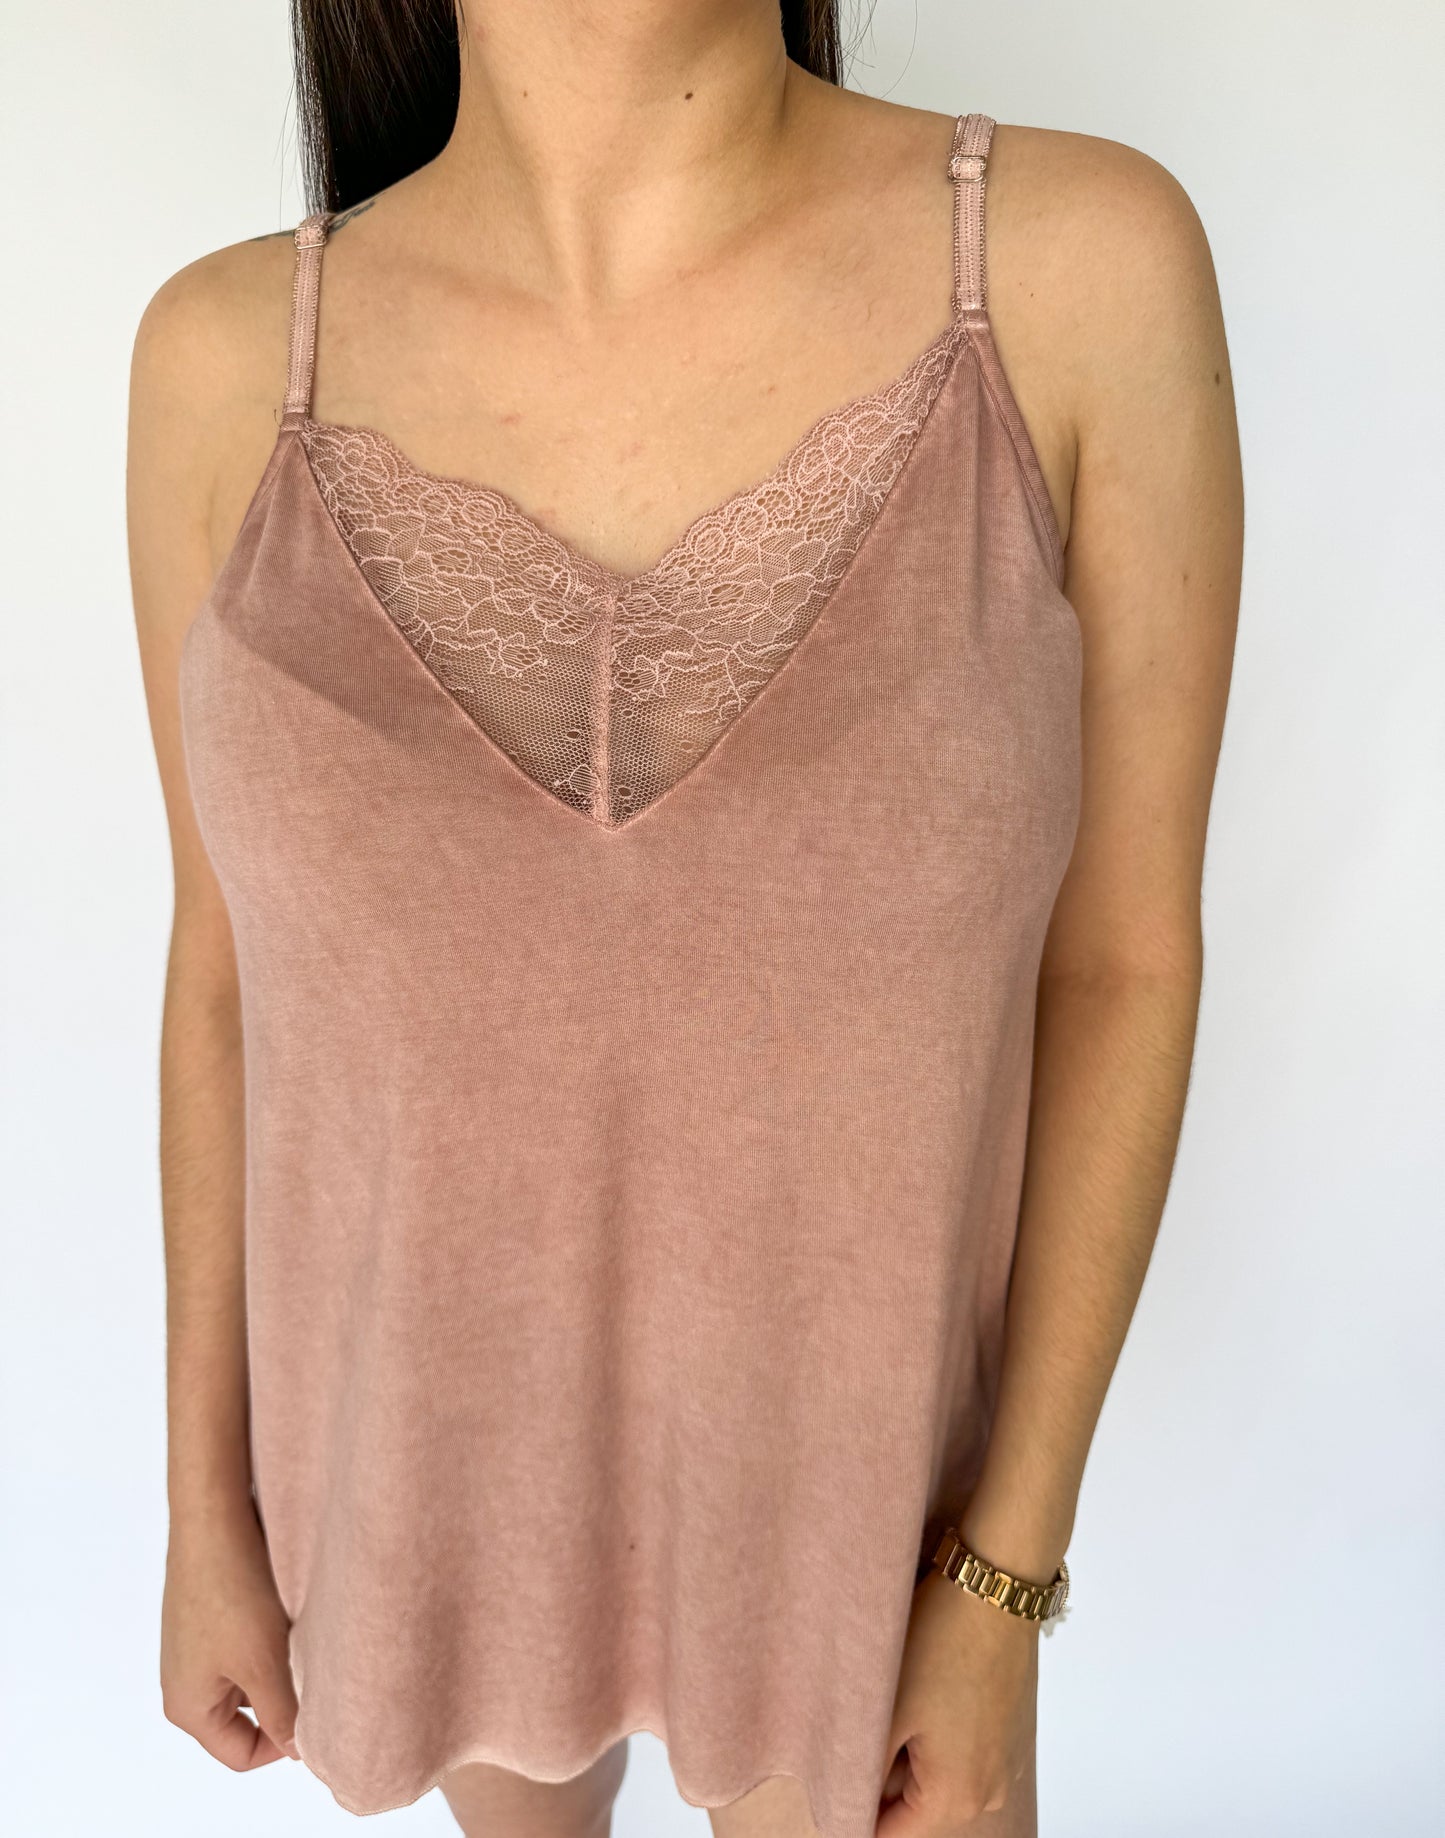 Made You Look Lace Cami Top *Blush*